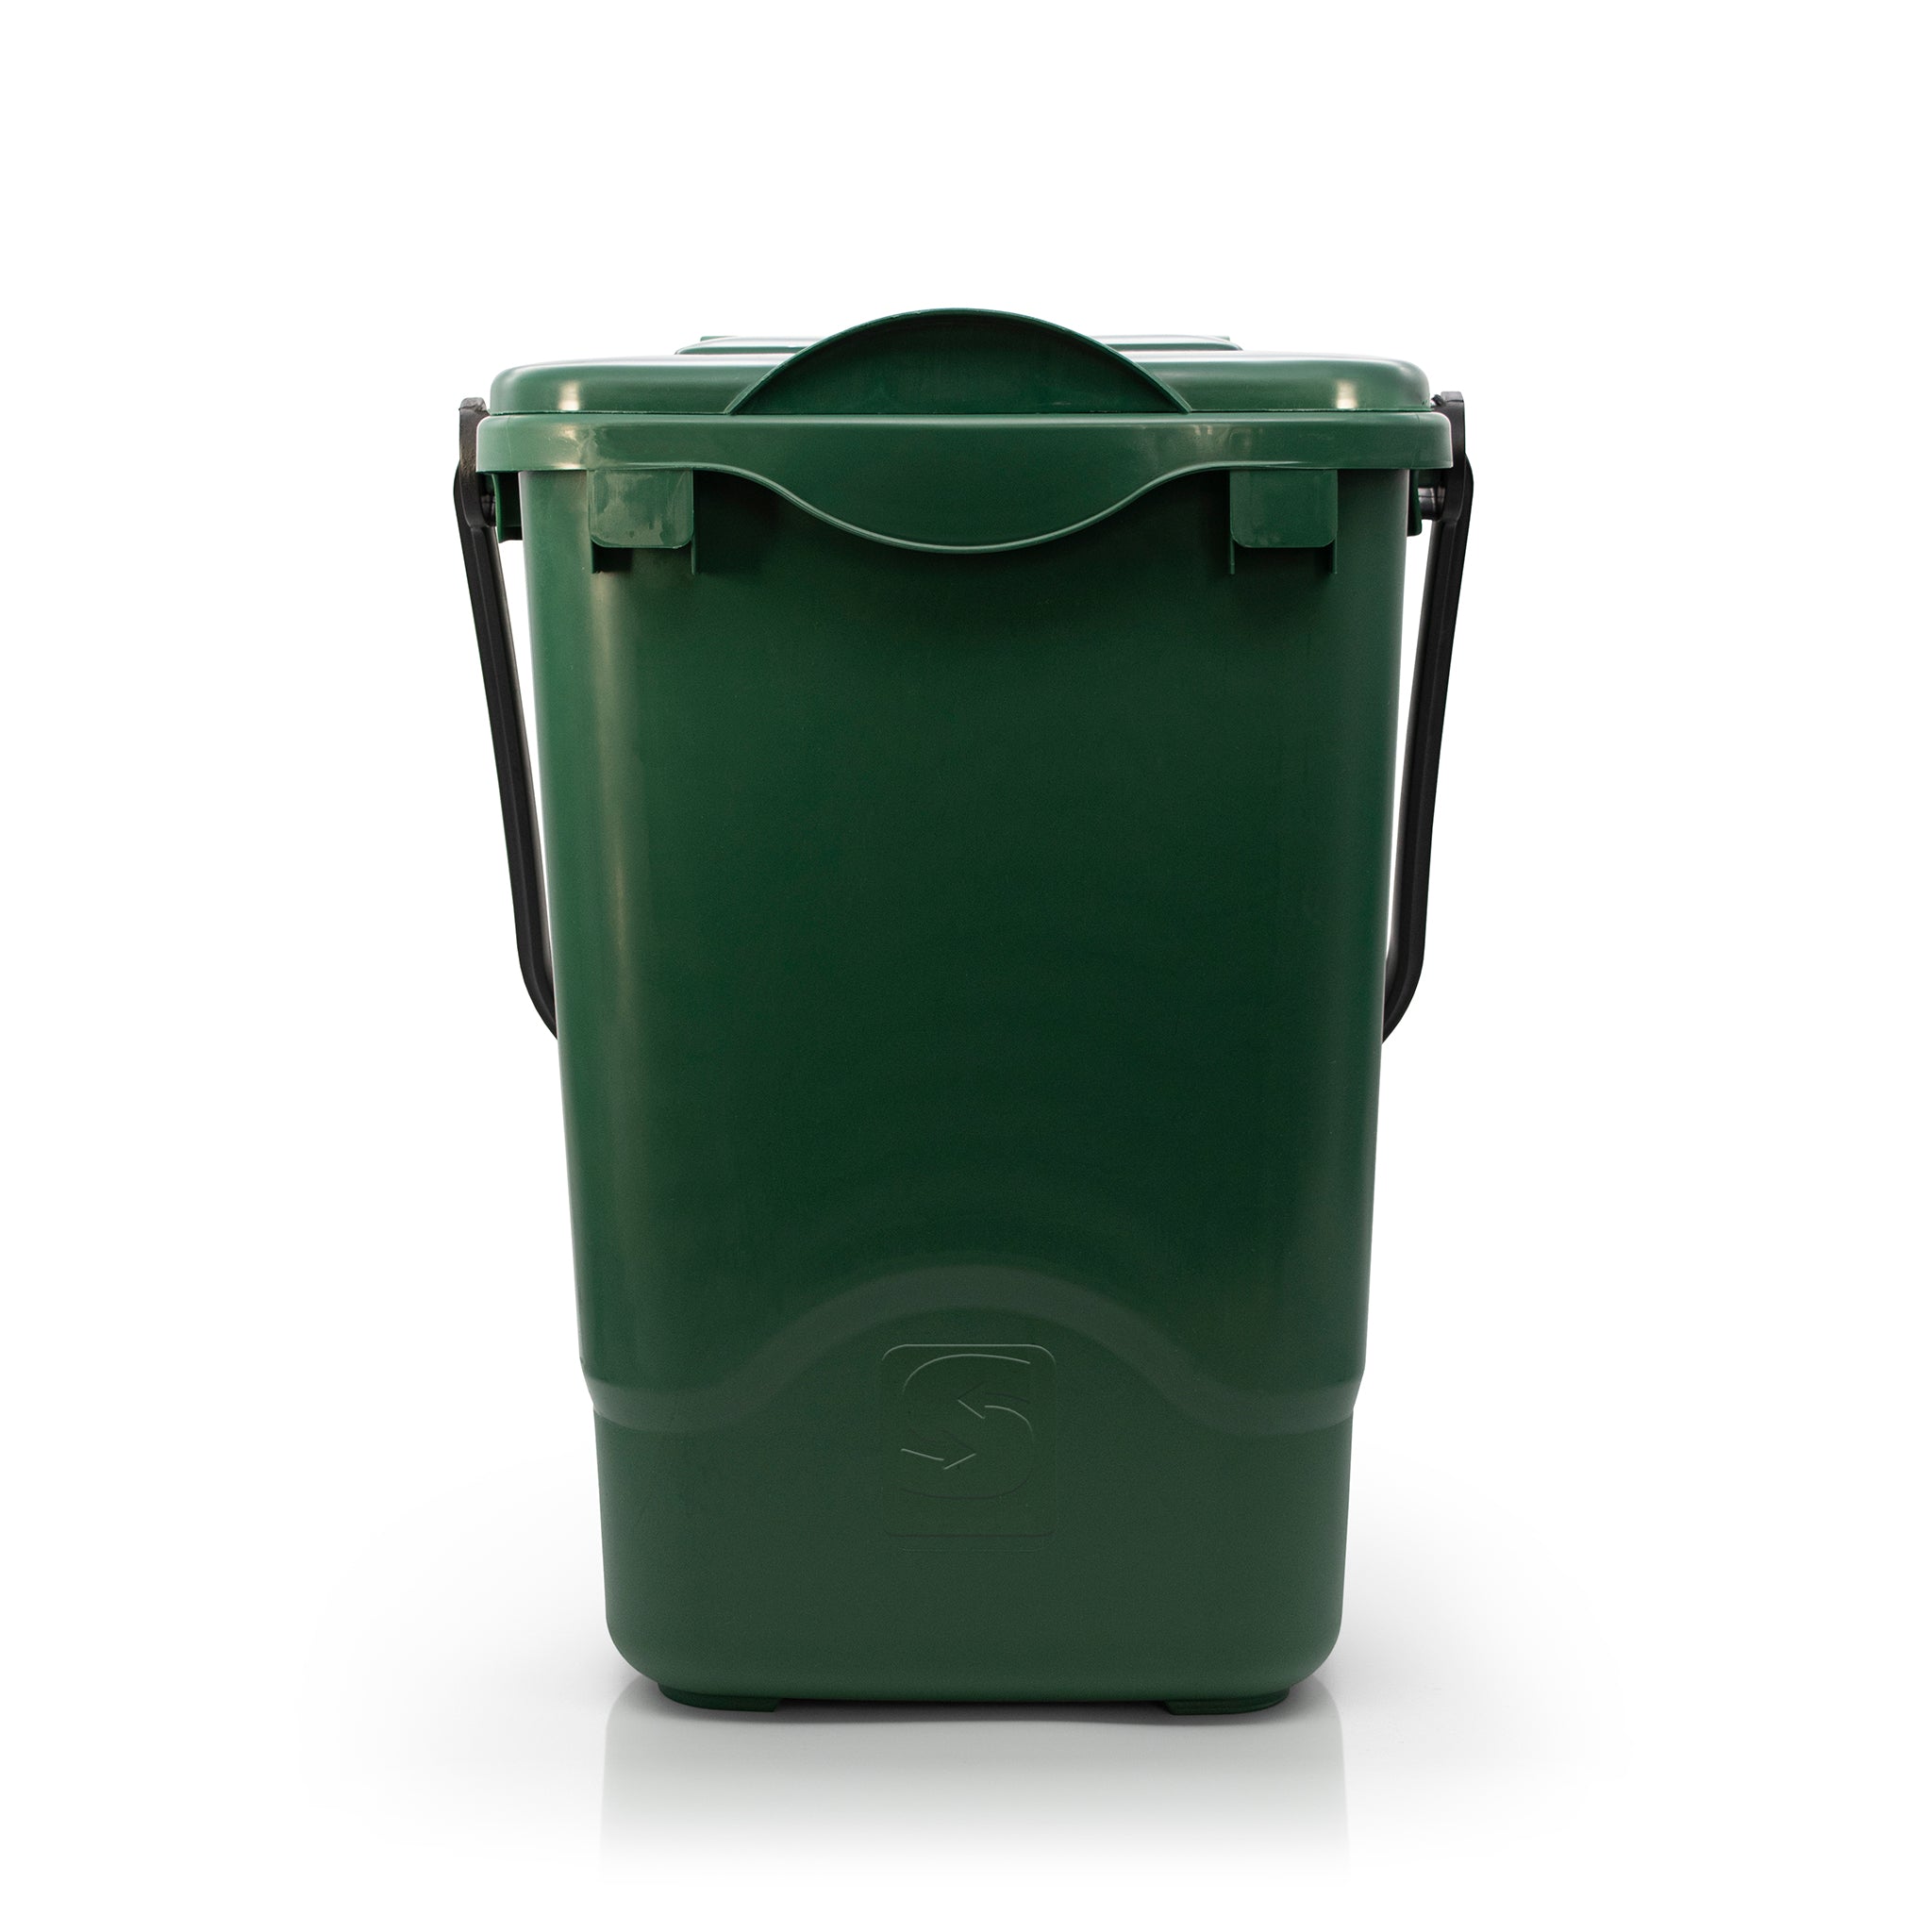 Front view of green compost caddy